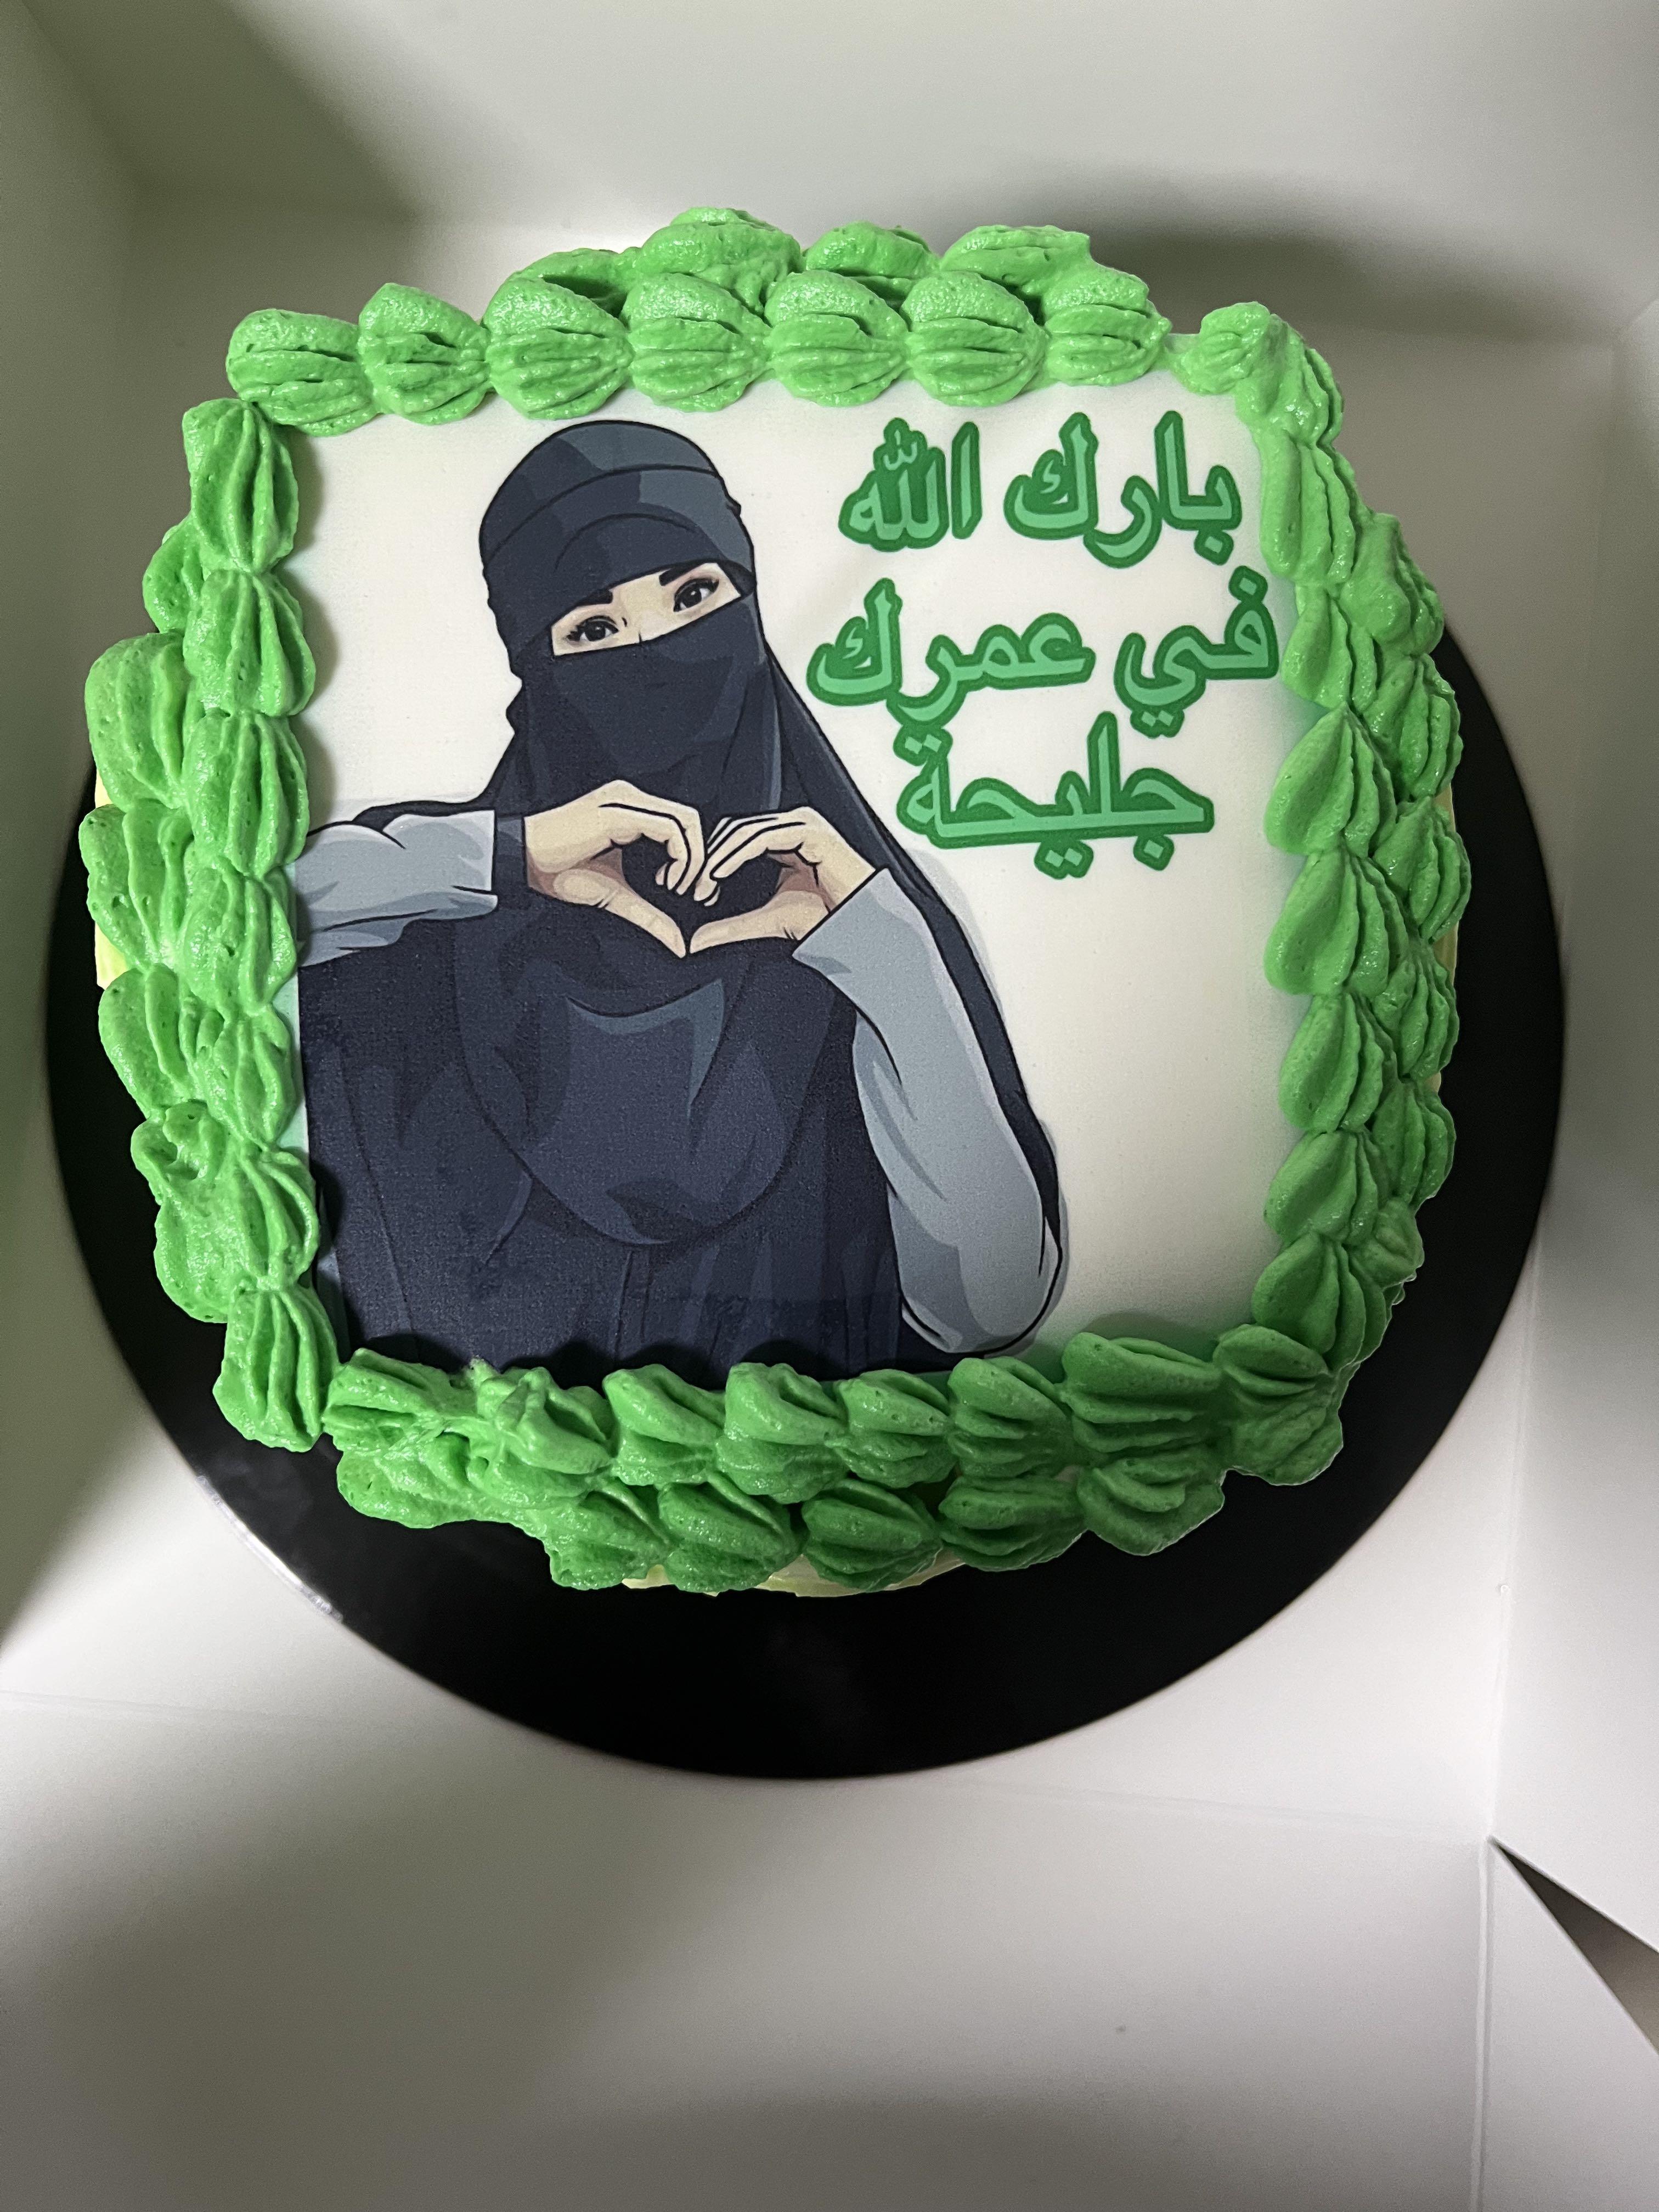 Arabic alphabet cake. Cake by... - Creative Expressions 53 | Facebook